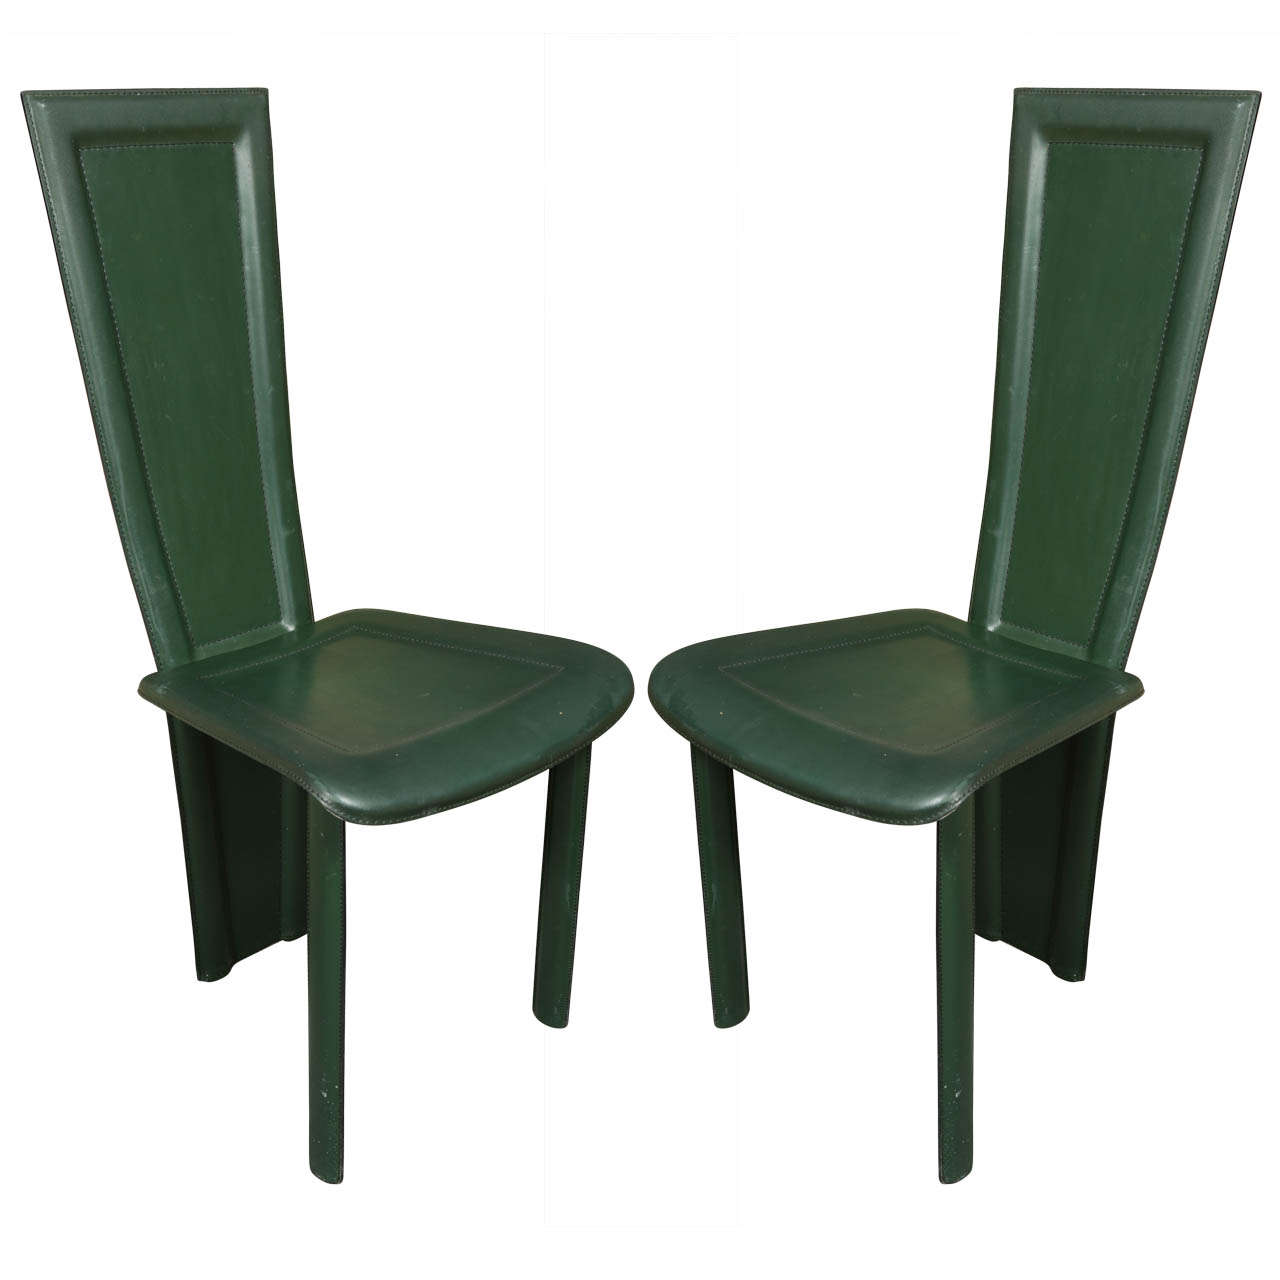 Pair of High-Back Leather Chairs by Artedi